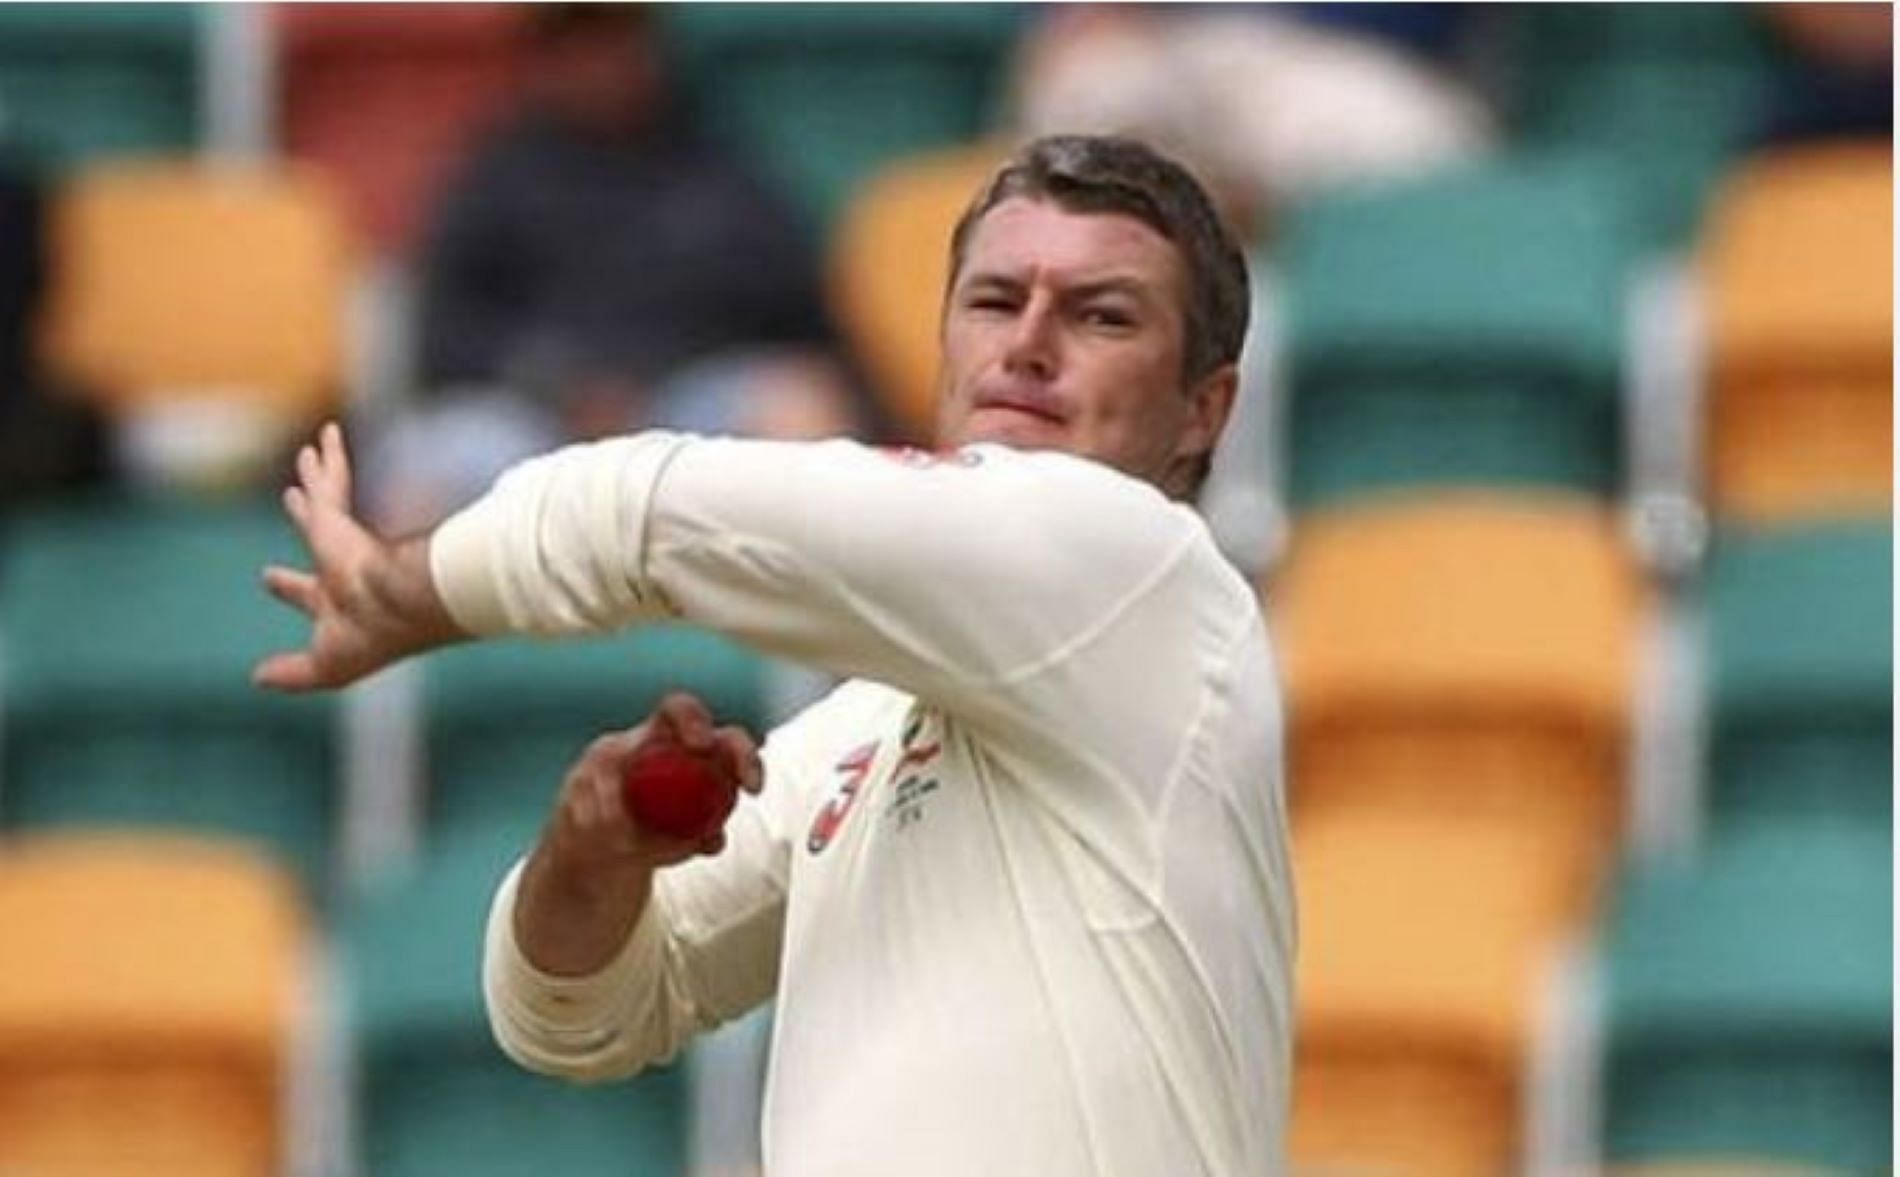 MacGill was a great bowler in his own right despite playing second fiddle to Shane Warne.